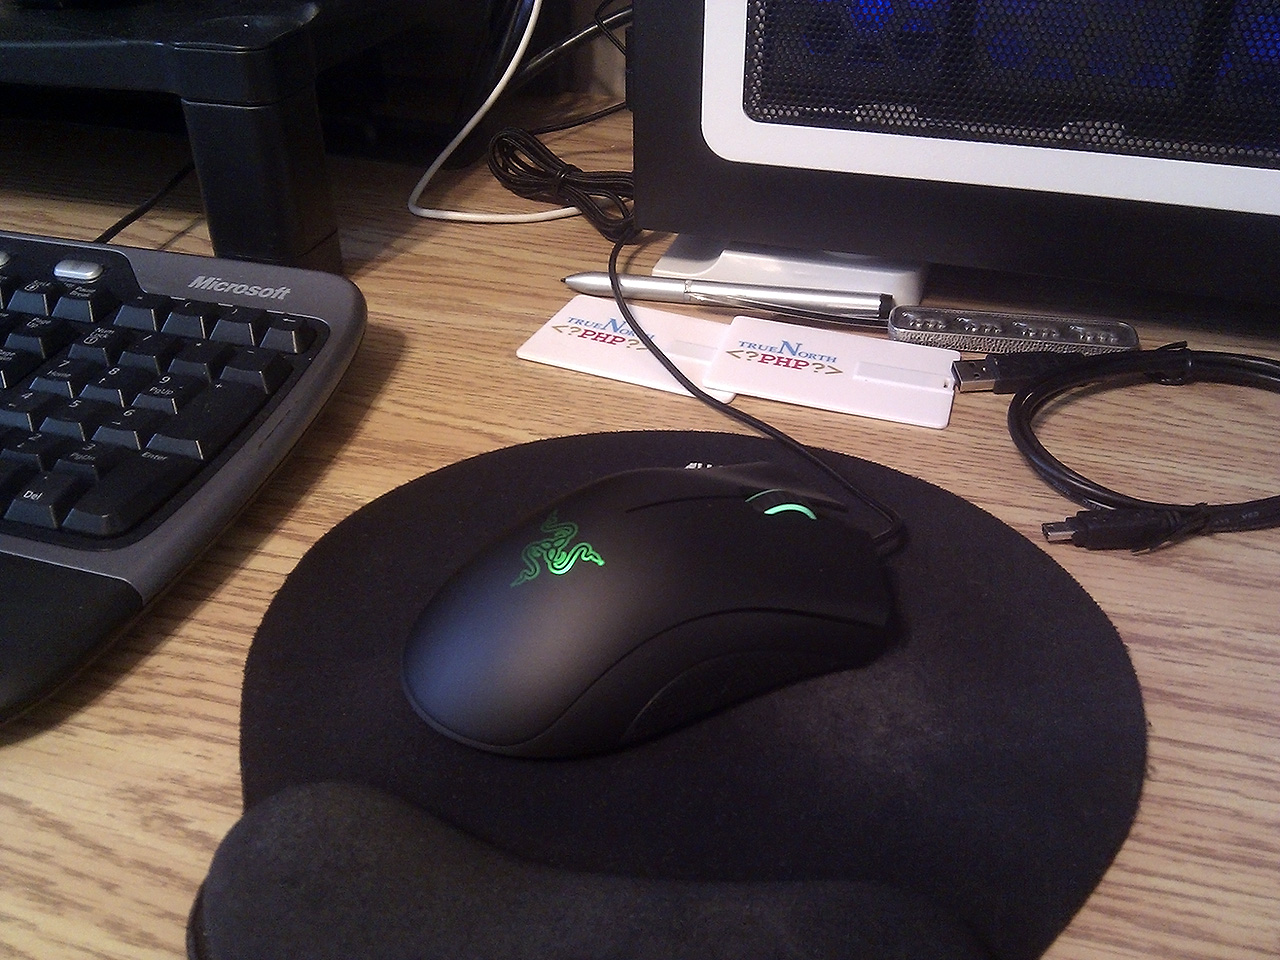 The DeathAdder ready for frags.